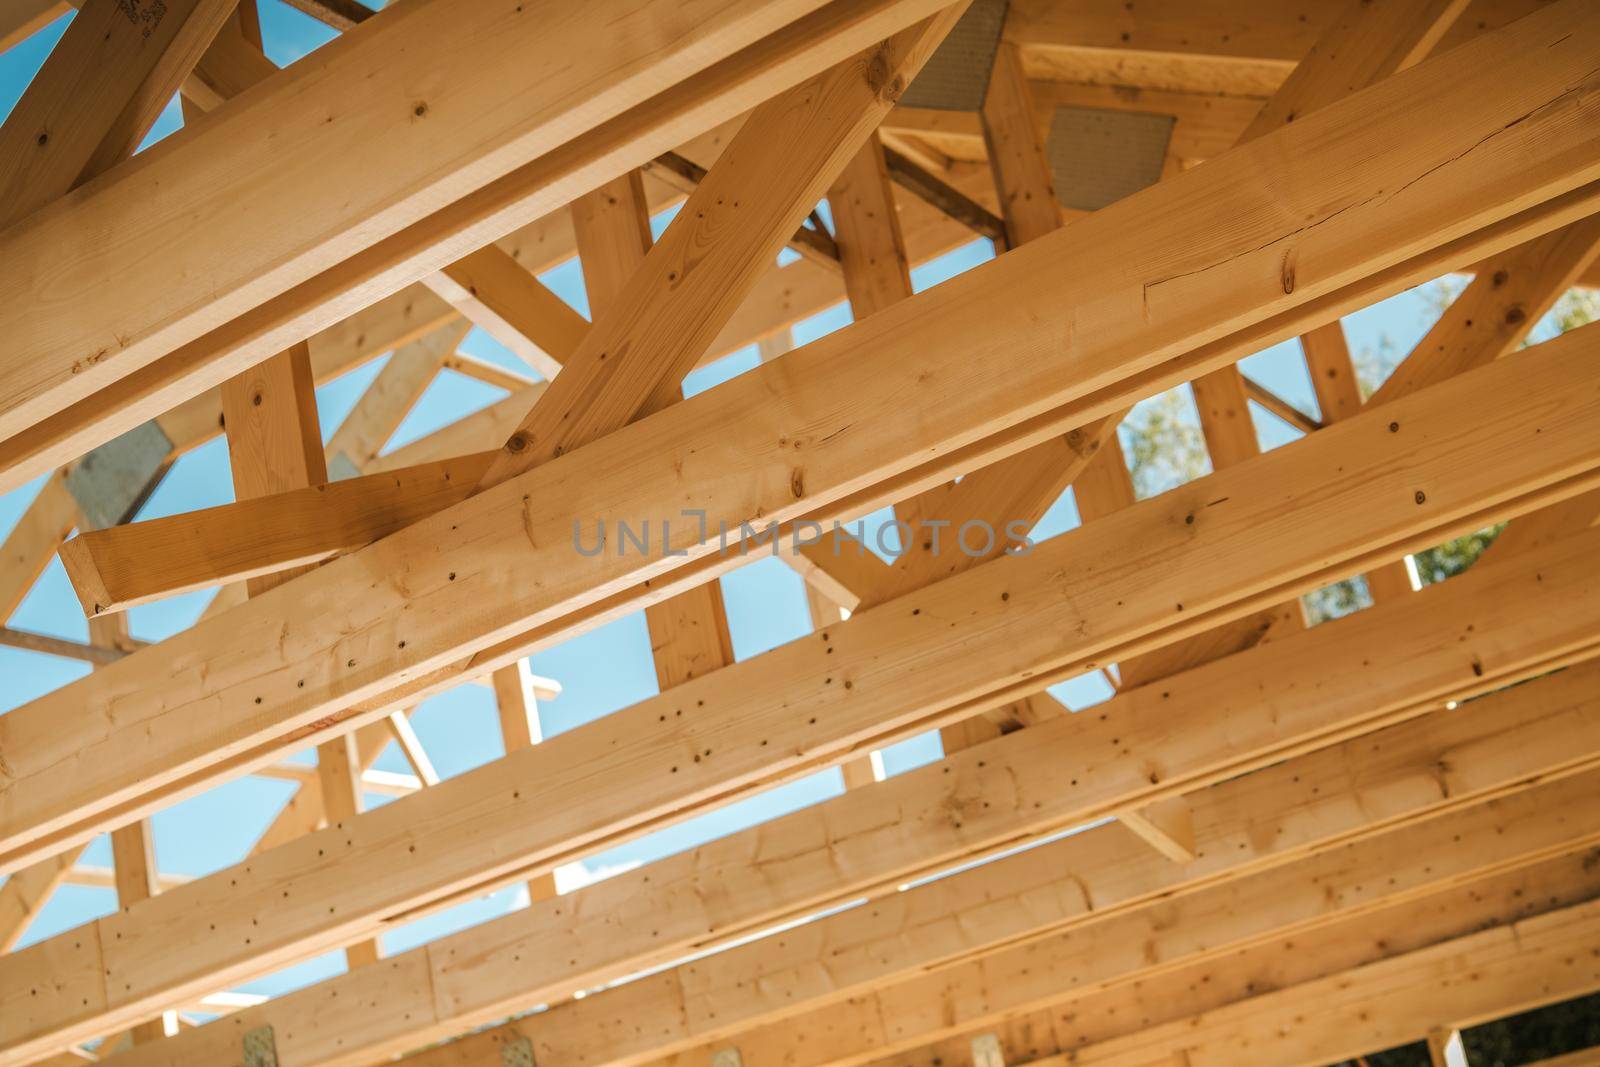 Wooden Roof Construction Beams Closeup Photo. Construction Industry Theme.  by welcomia